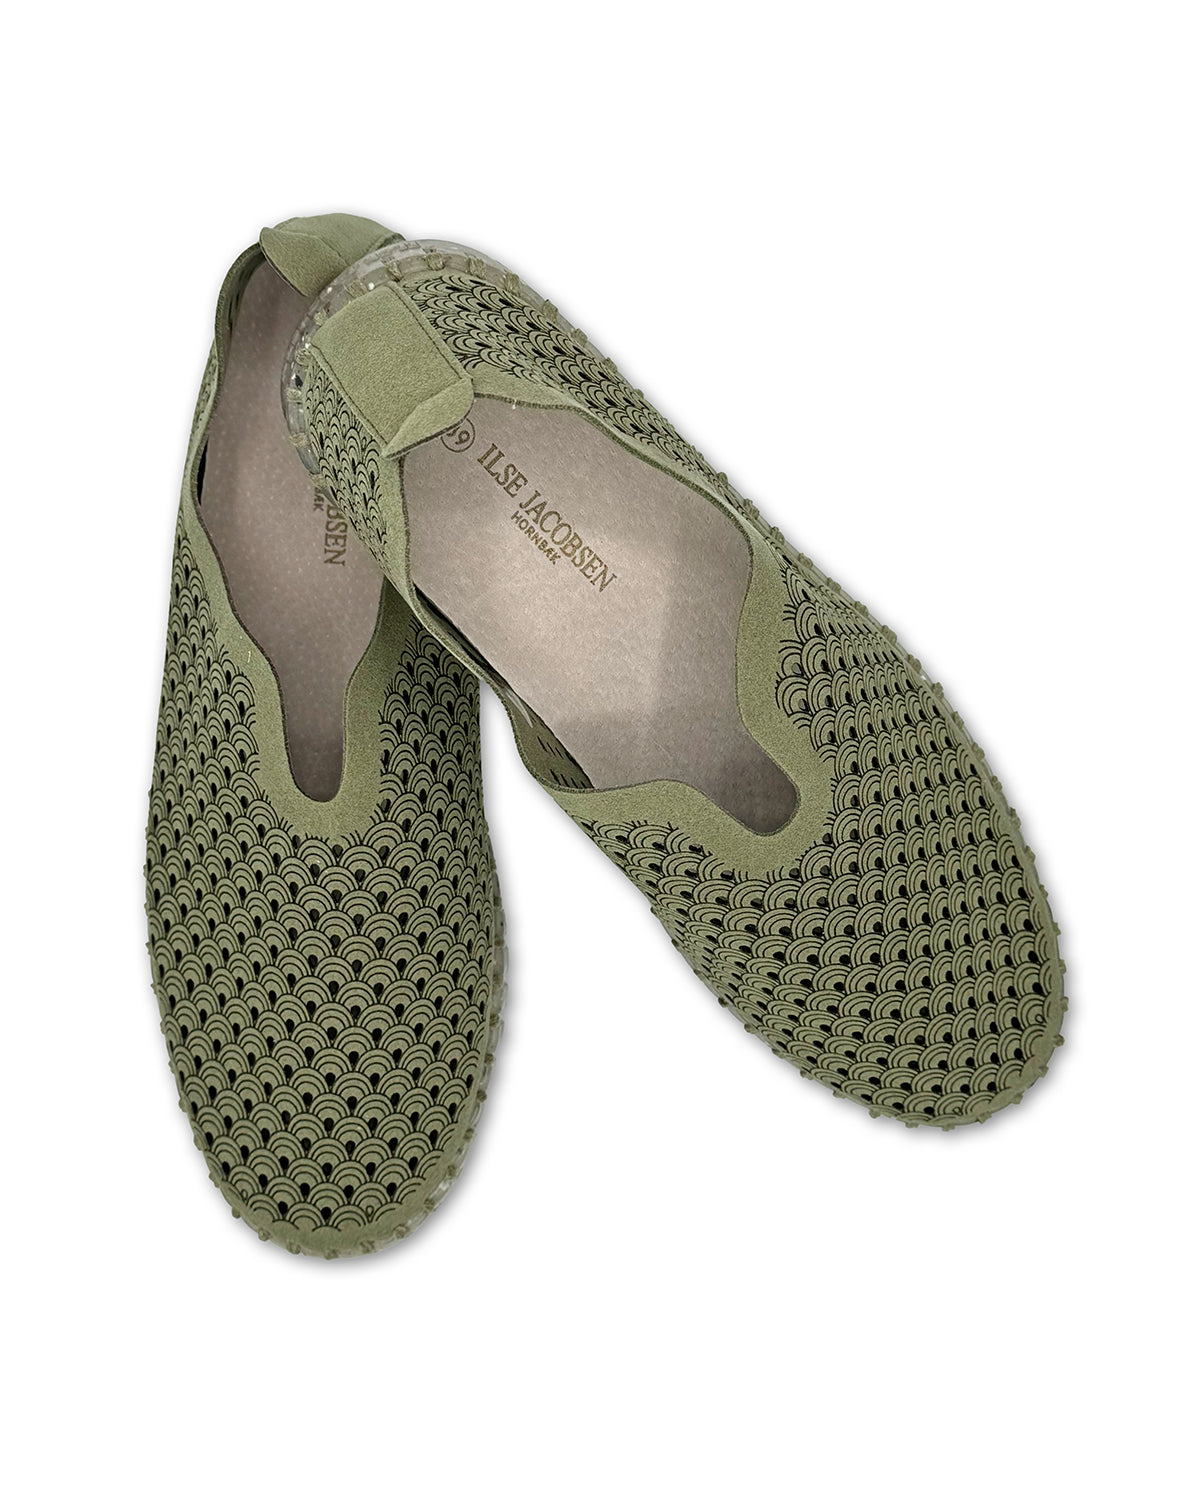 Ilse Jacobsen Tulip flat shoe in color army